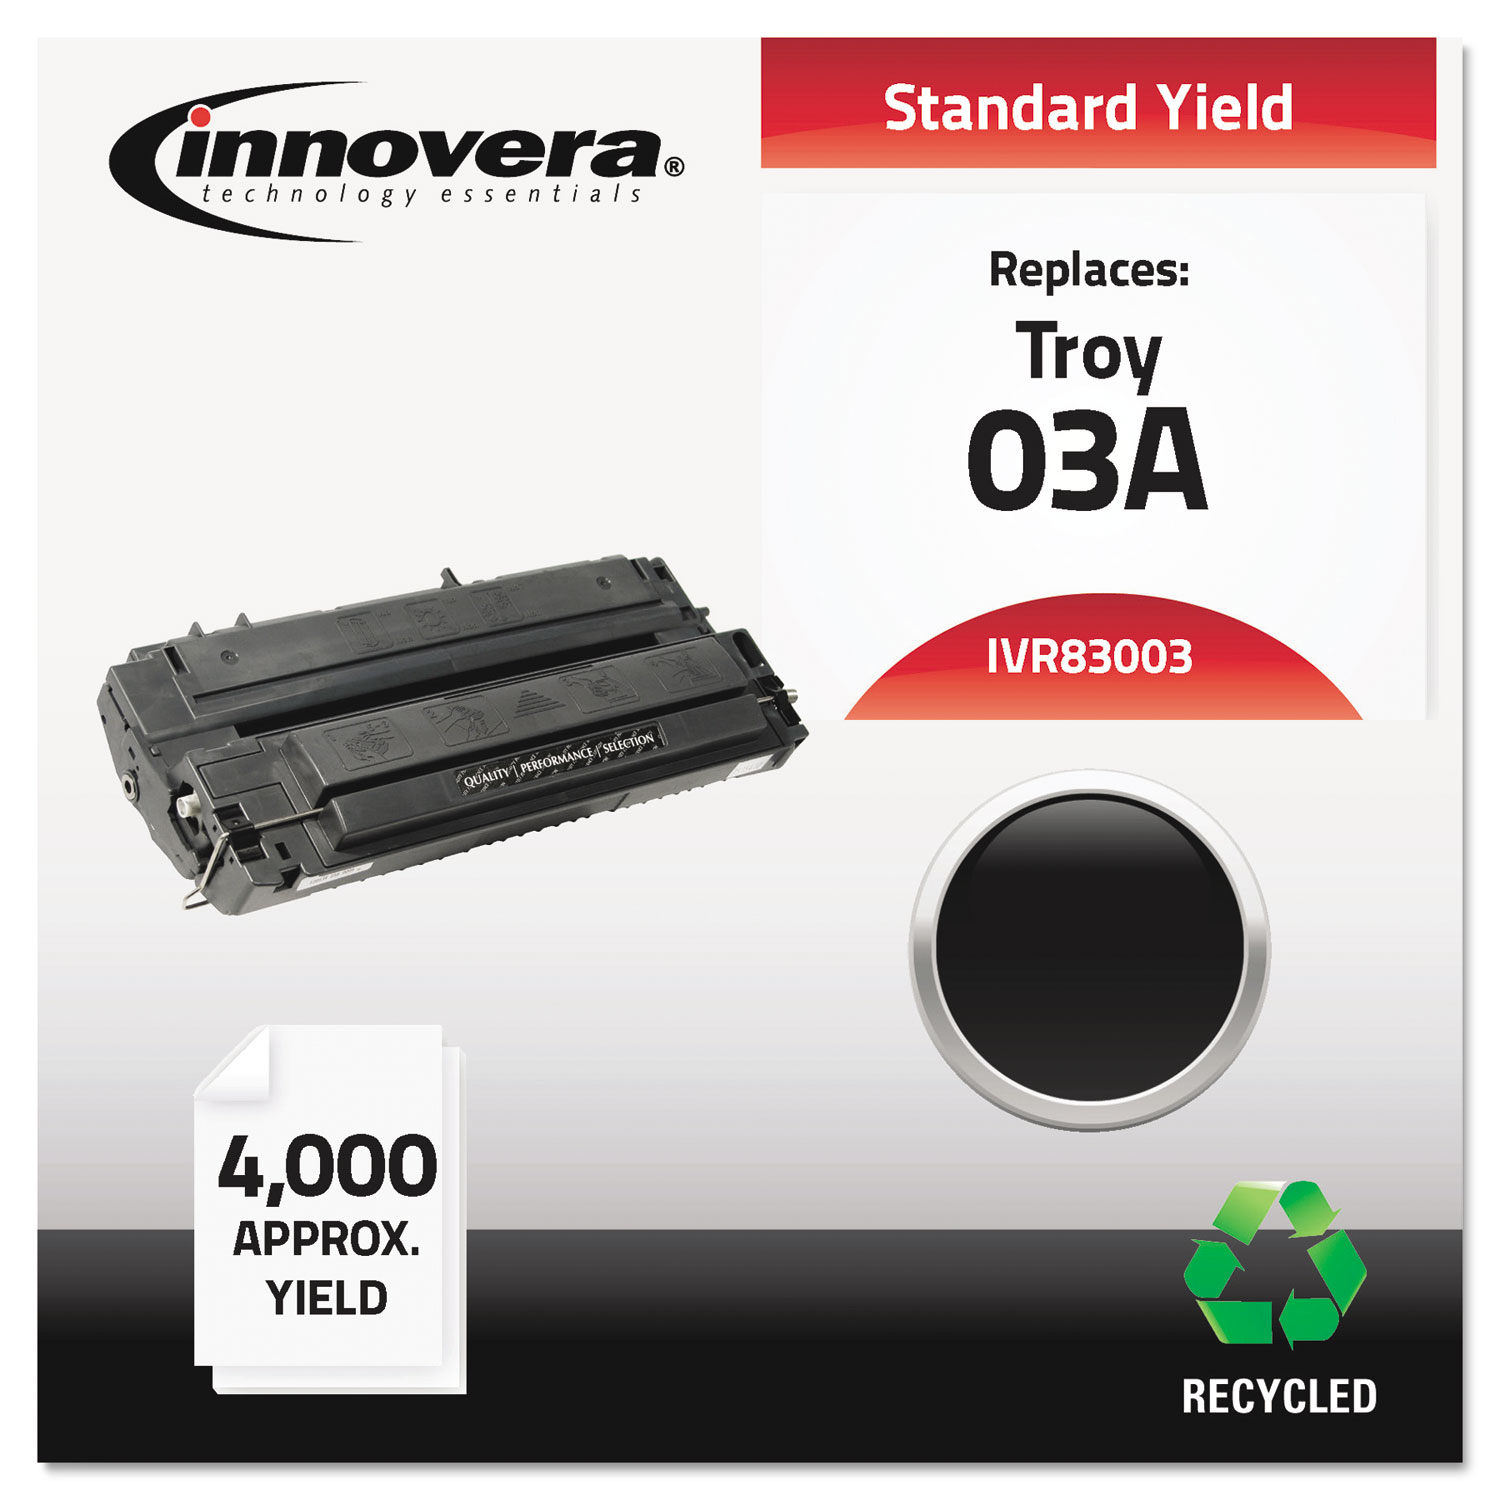  Innovera IVR83003 Remanufactured C3903A (03A) Toner, 4000 Page-Yield, Black (IVR83003) 